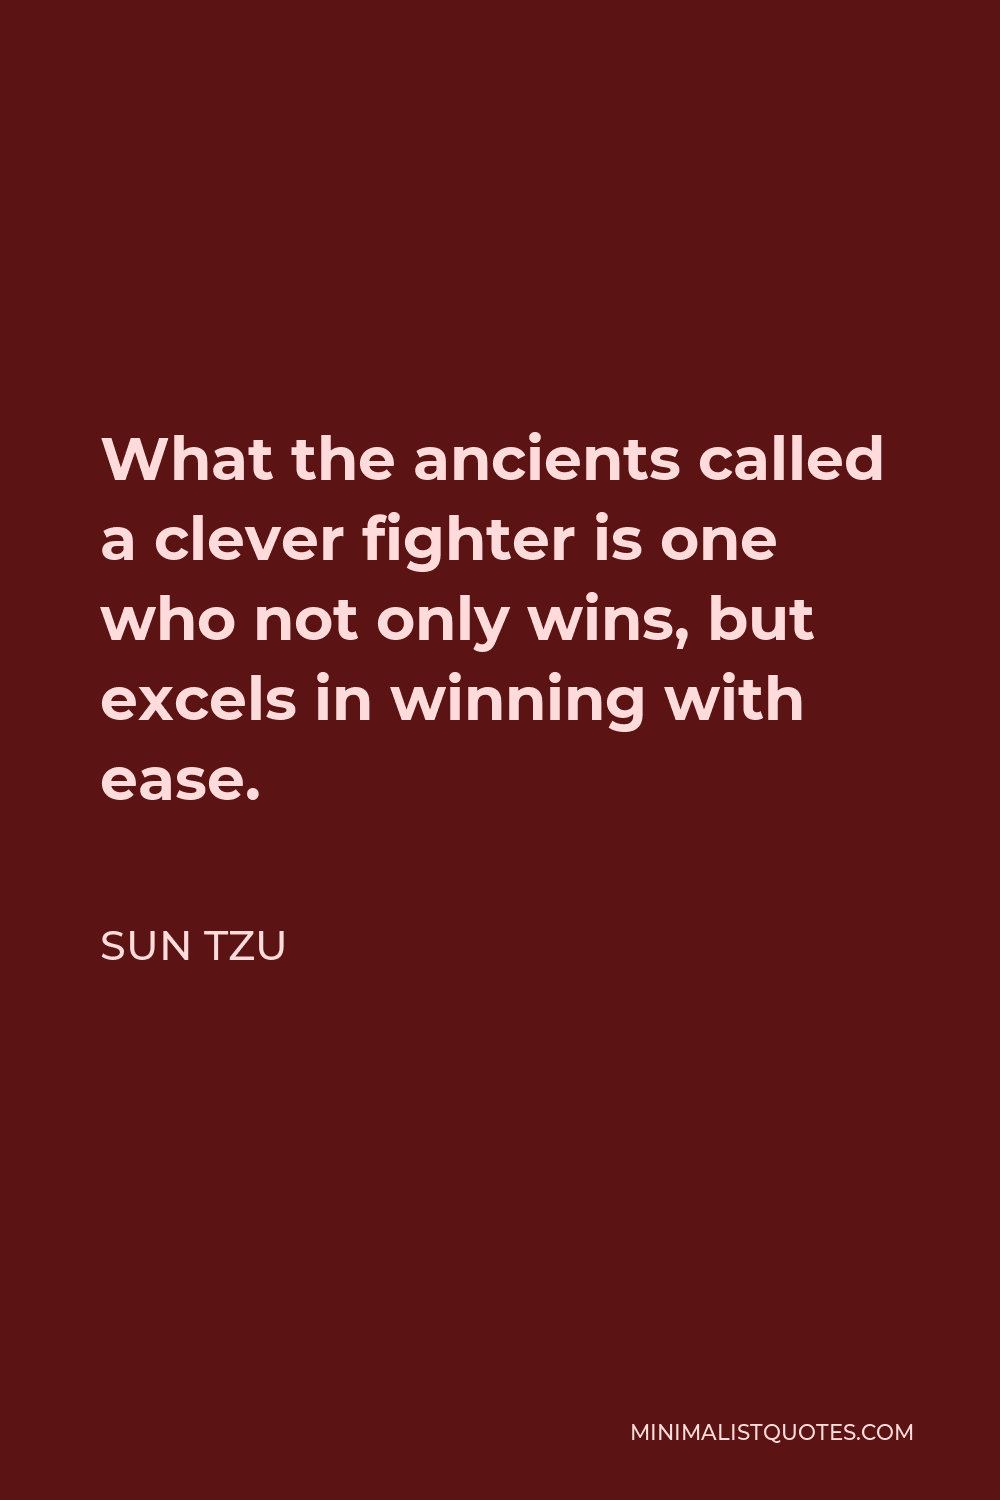 Sun Tzu Quote - What the ancients called a clever fighter is one who not only wins, but excels in winning with ease.